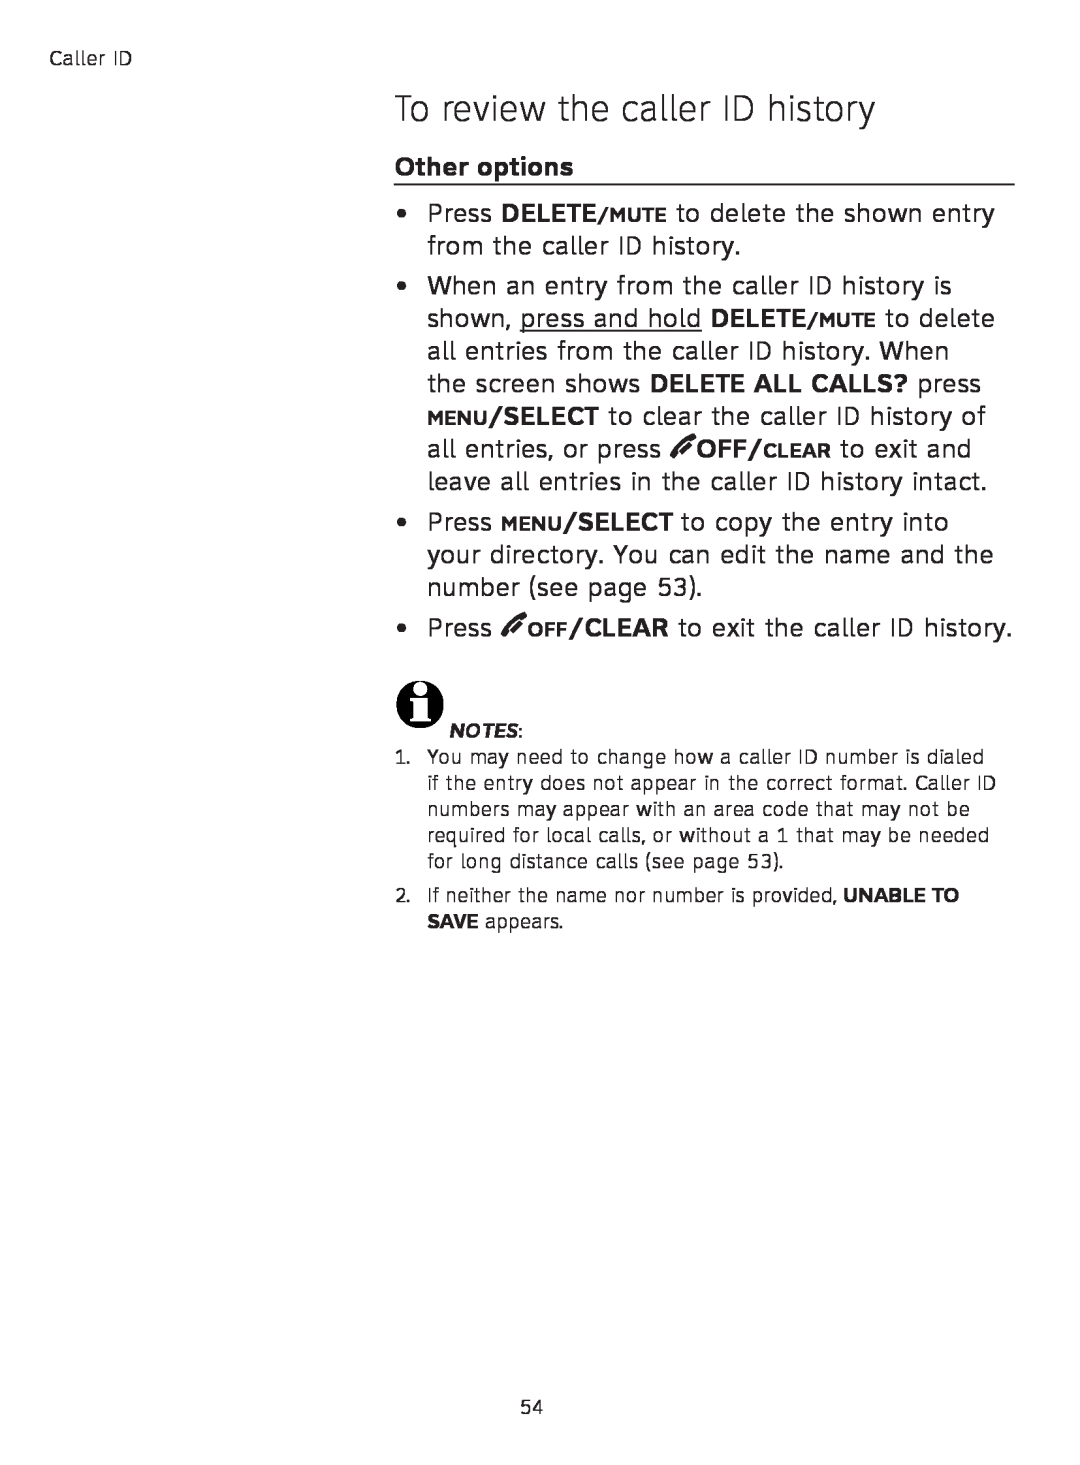 AT&T TL91278, TL9178, TL91378, TL91178 user manual Other options, To review the caller ID history 